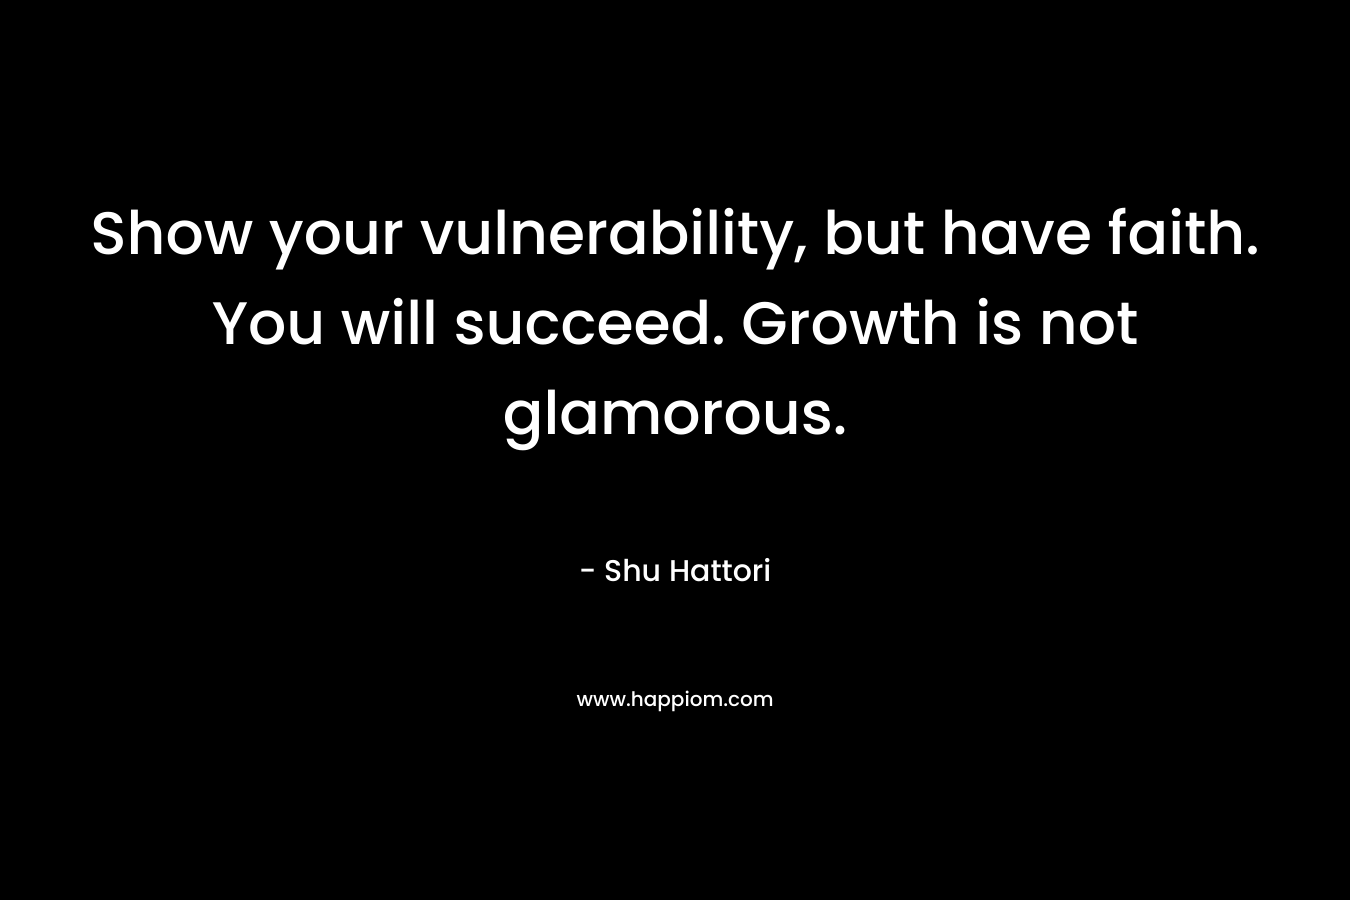 Show your vulnerability, but have faith. You will succeed. Growth is not glamorous. – Shu Hattori